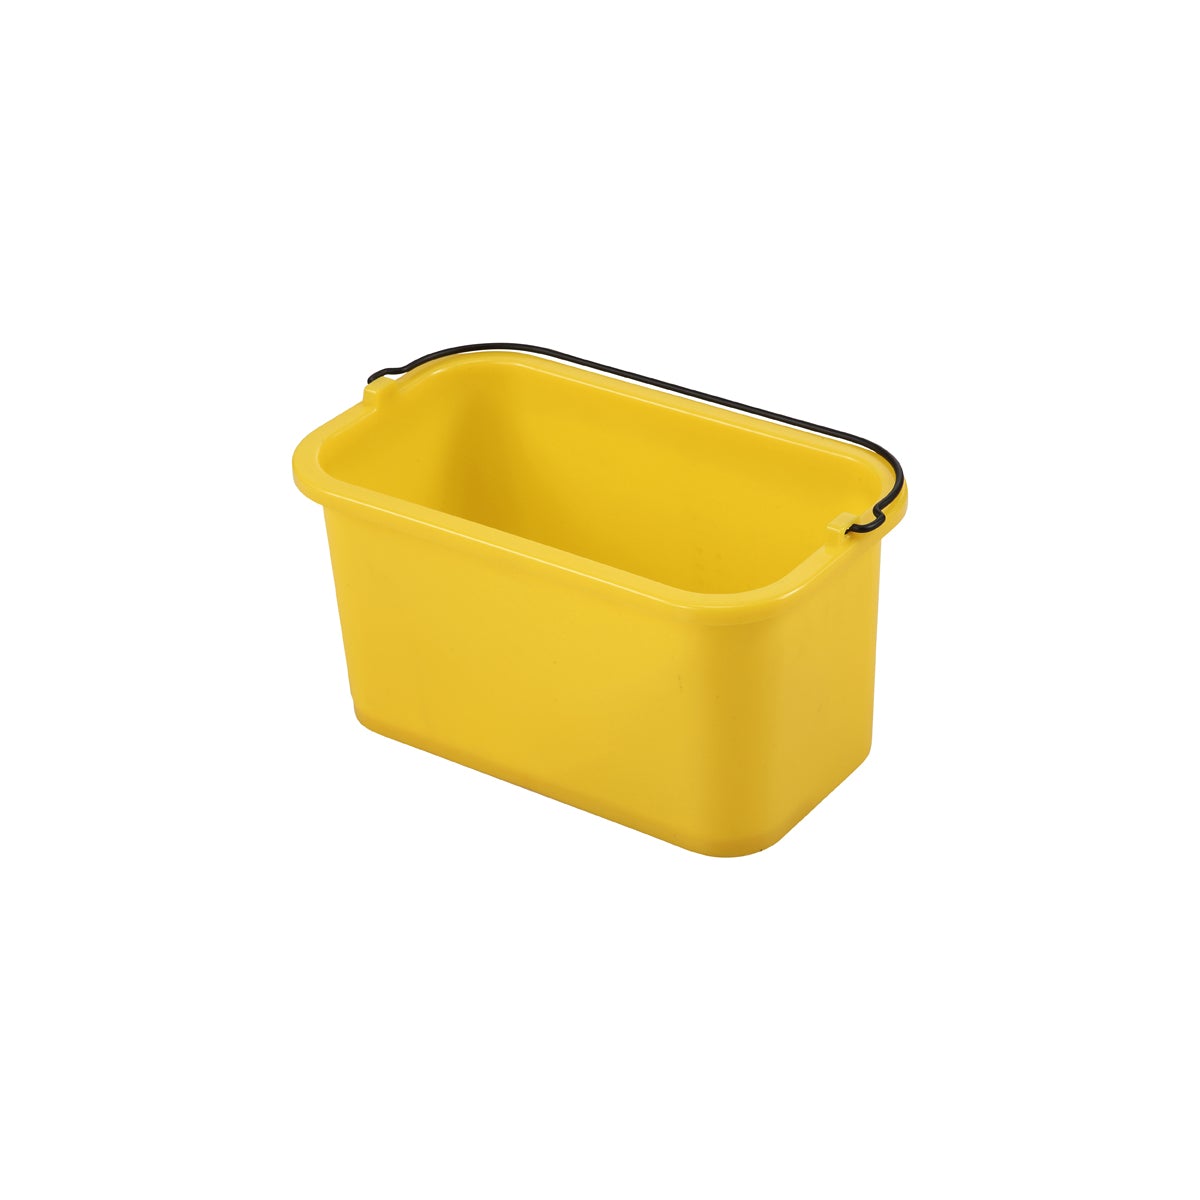 JW-DP10 Jiwins Container / Bucket for Cleaning Cart Yellow 9.46Lt Tomkin Australia Hospitality Supplies